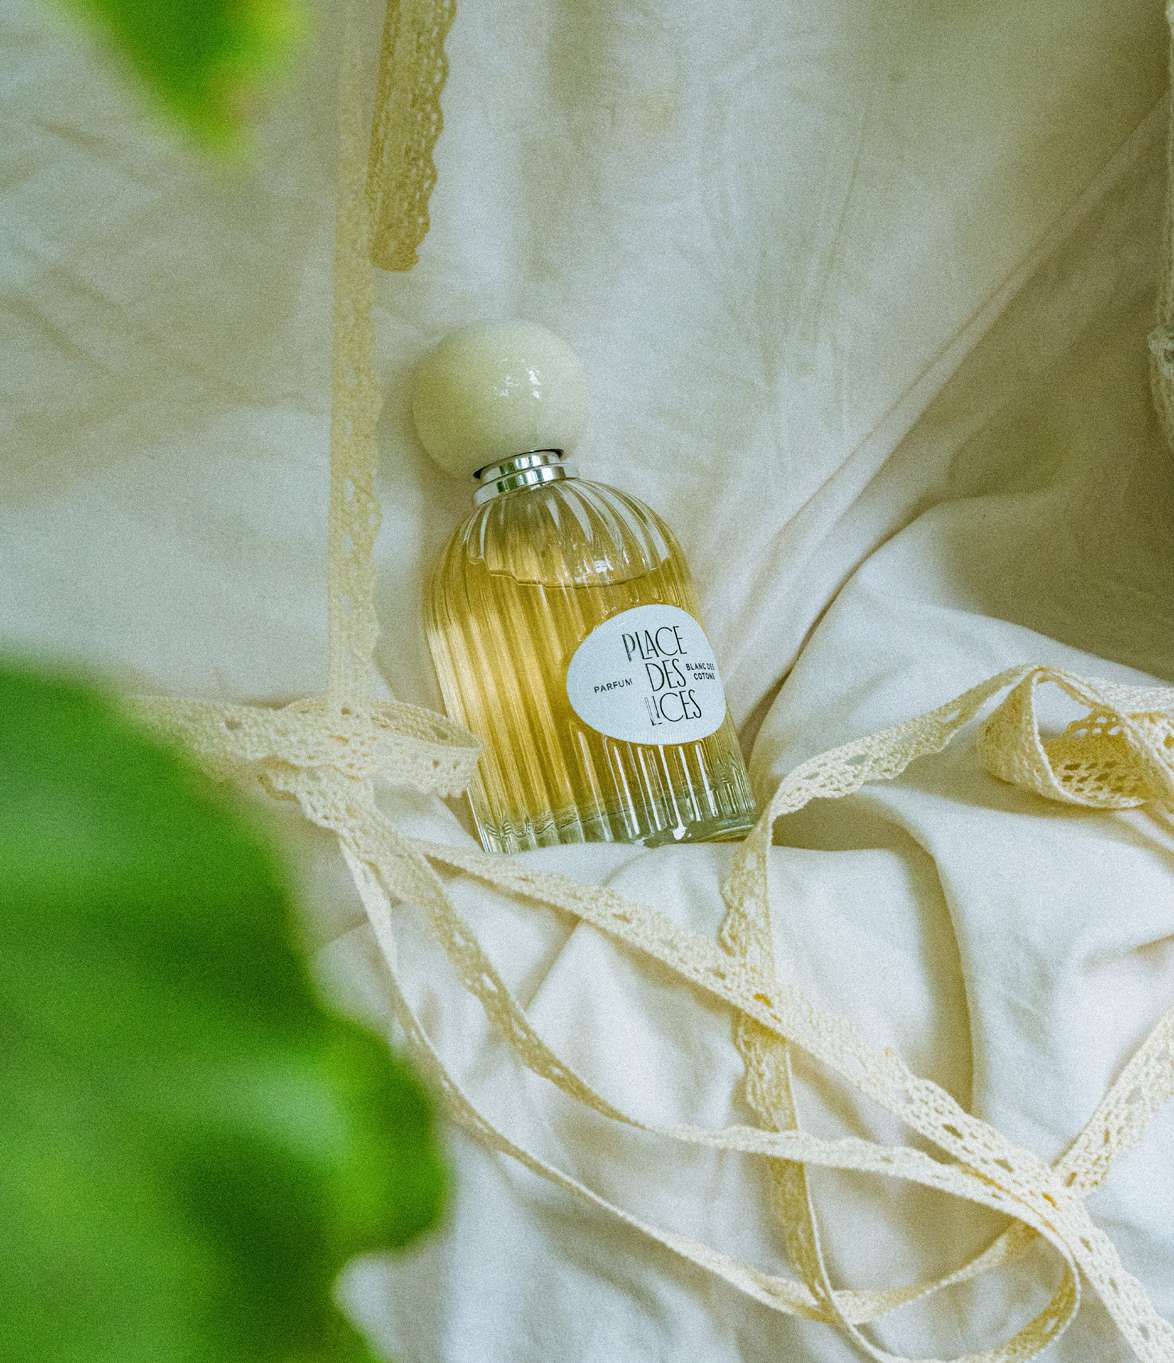 A bottle of Blanc des Cotons by Place des Lices lies amongst soft fabrics and greenery.